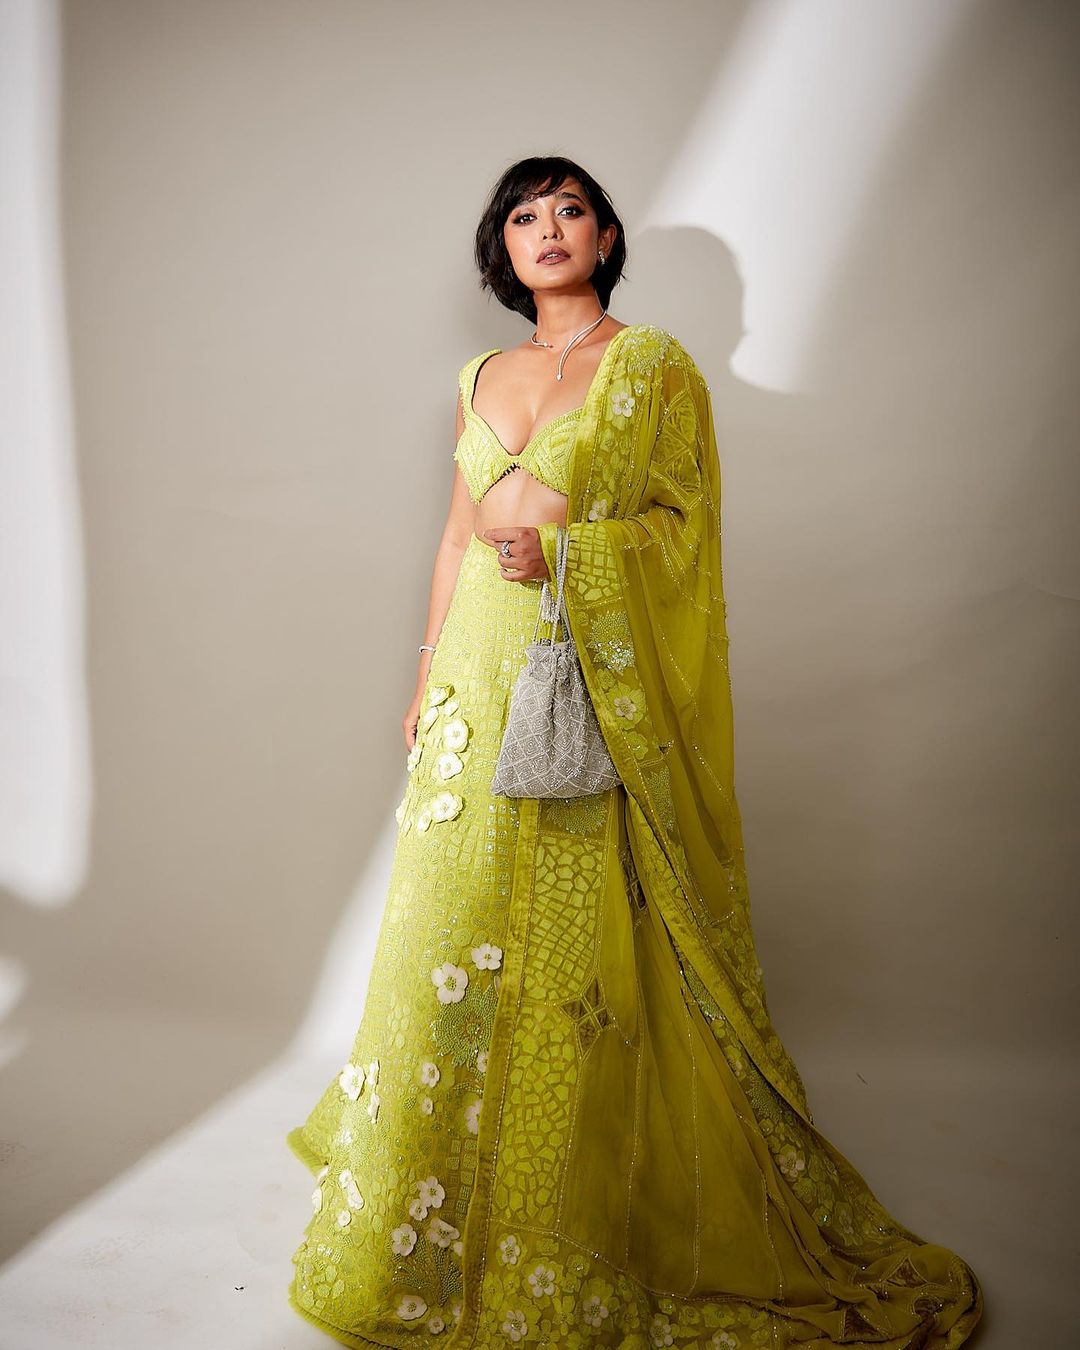 Sayani Gupta Hot and Dazzling Outfit Looks